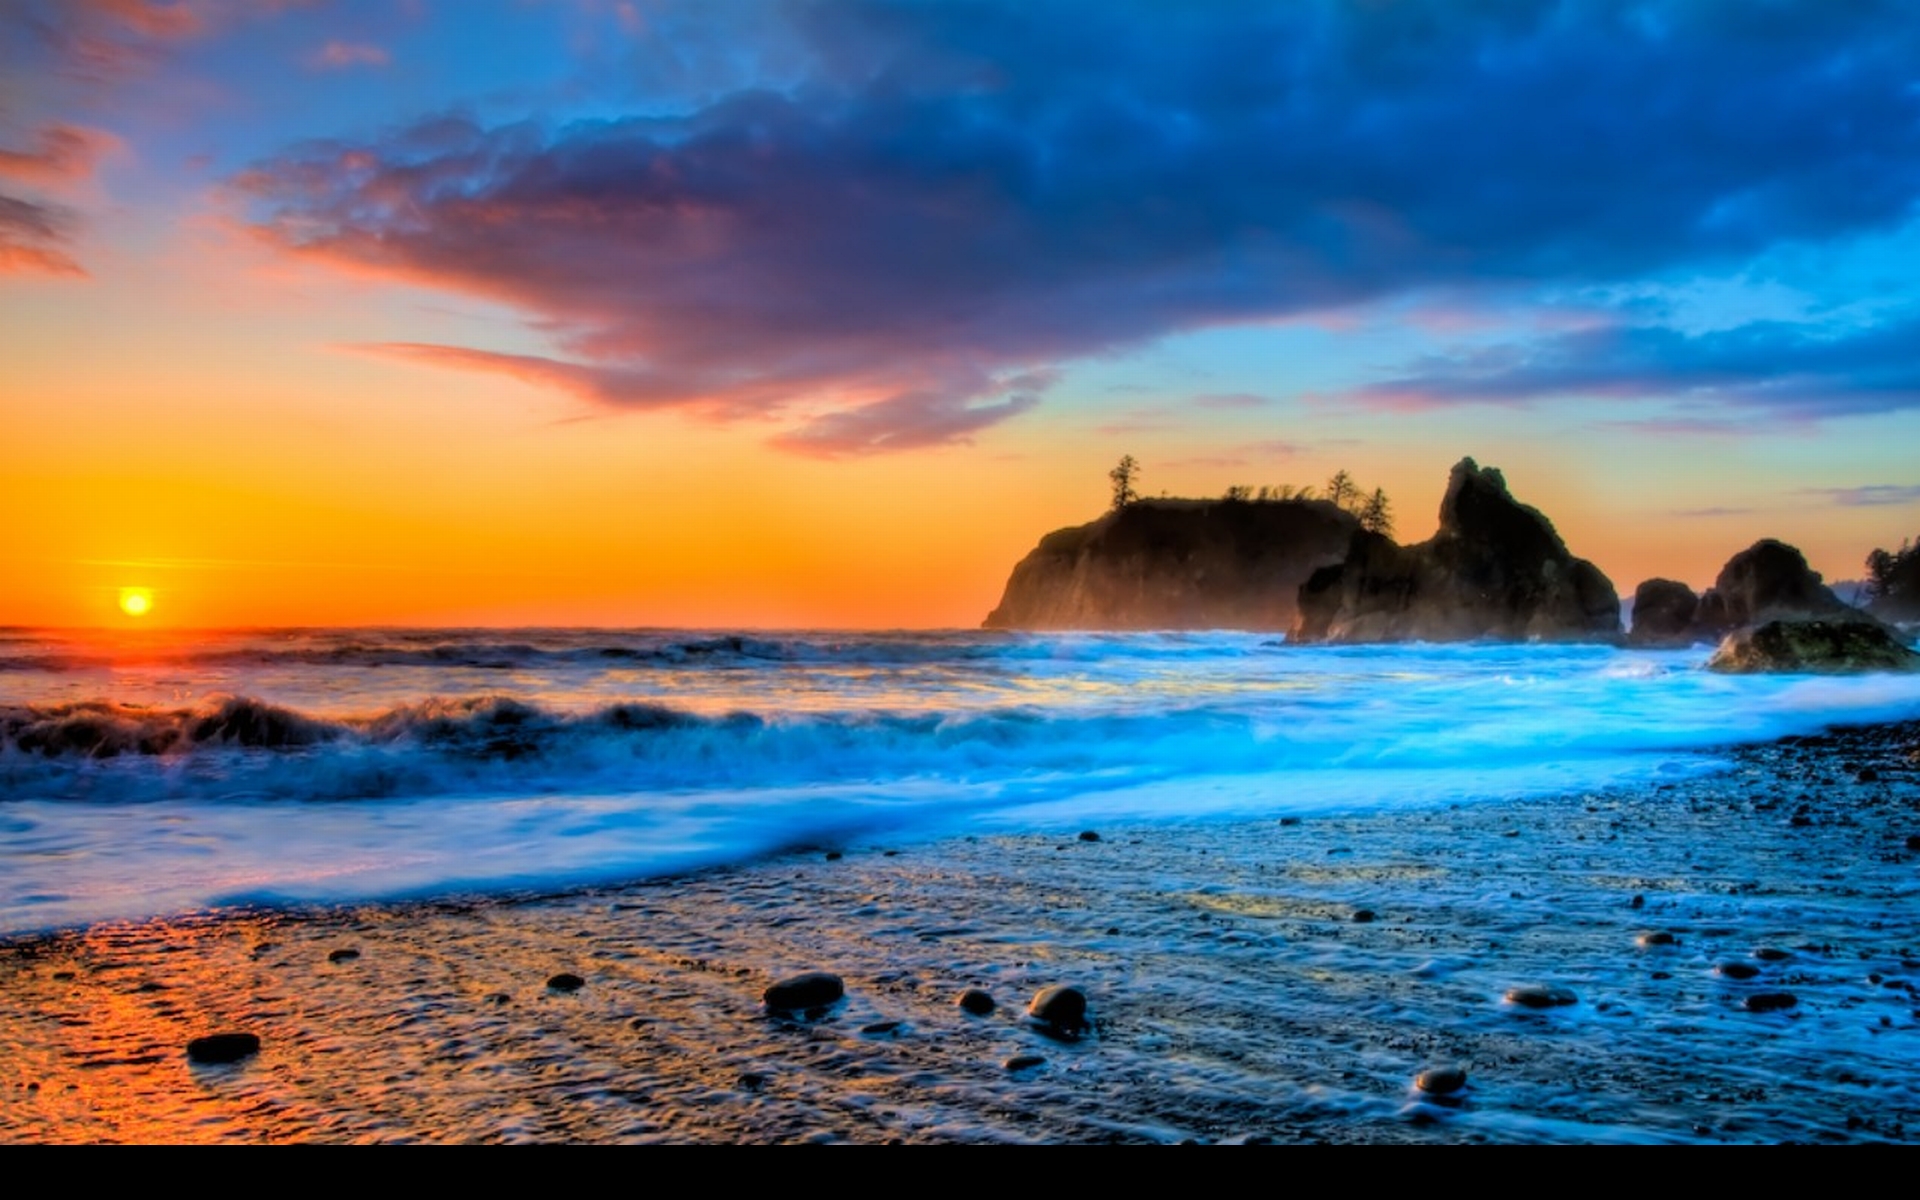 Beach Sunset Landscape Wallpaper Images amp Pictures   Becuo